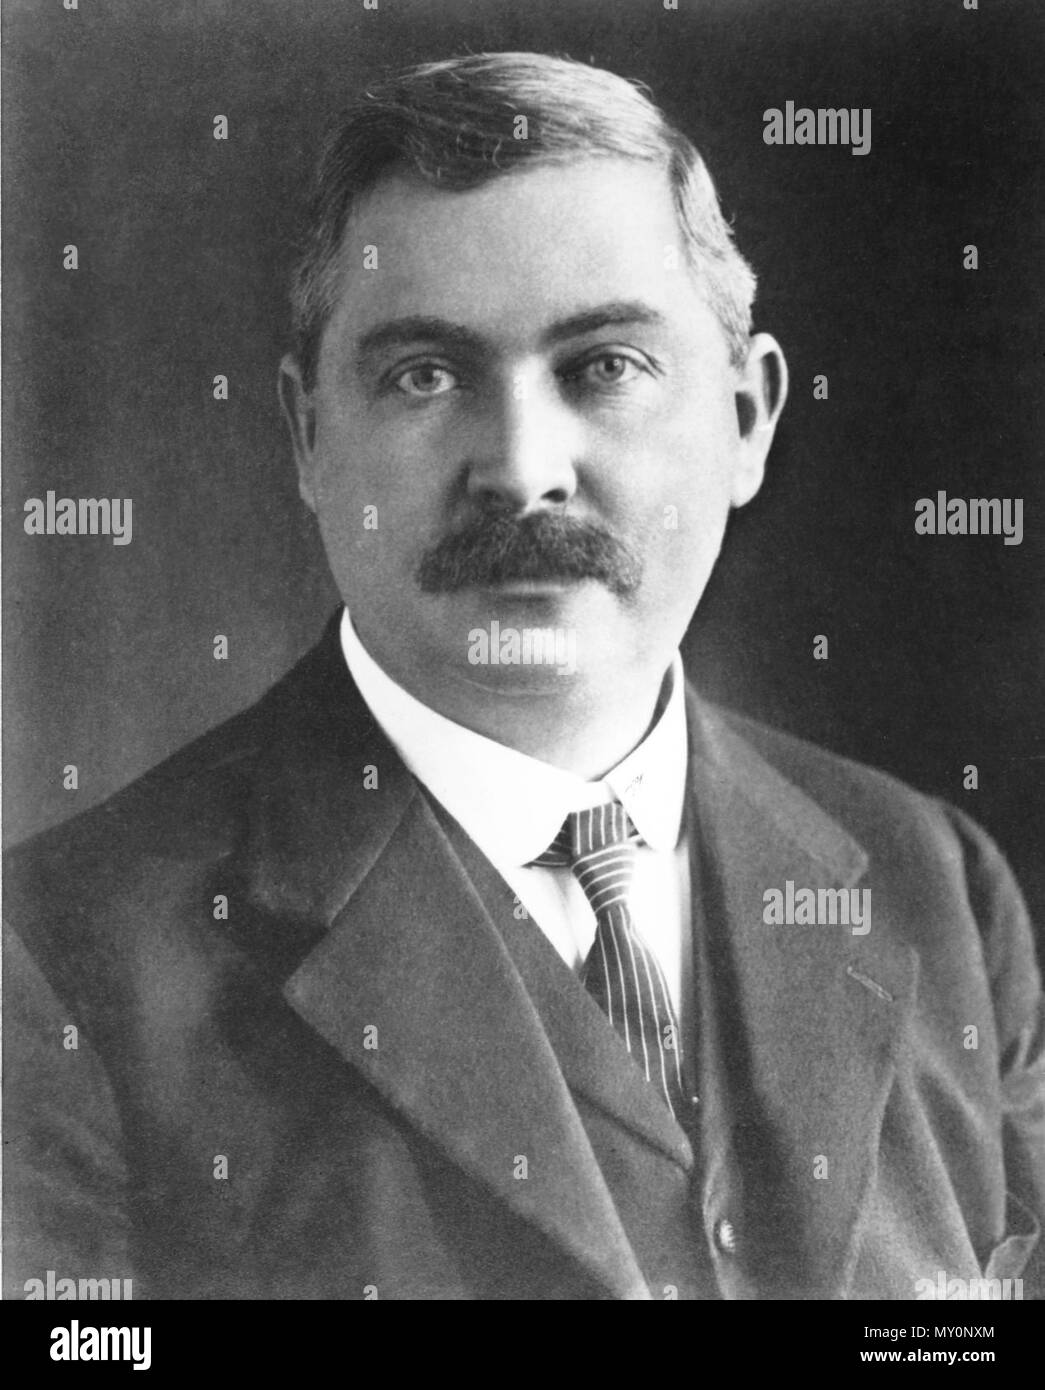 Portrait of The Honourable Thomas Joseph Ryan, Premier of Queensland. Thomas Joseph Ryan (1 July 1876 - 1 August 1921) was Premier of Queensland from May 1915 until October 1919 when he resigned to enter Federal politics.  The Ryan government was the first majority Australian Labor Party government of Queensland as a result of the 1915 election. Some of the eight members of his Cabinet had connections with the early ALP of the 1880s and the Shearer's Strike.  His government would provide the example which would see Labor in power in Queensland almost continuously until 1957. Major reform of La Stock Photo